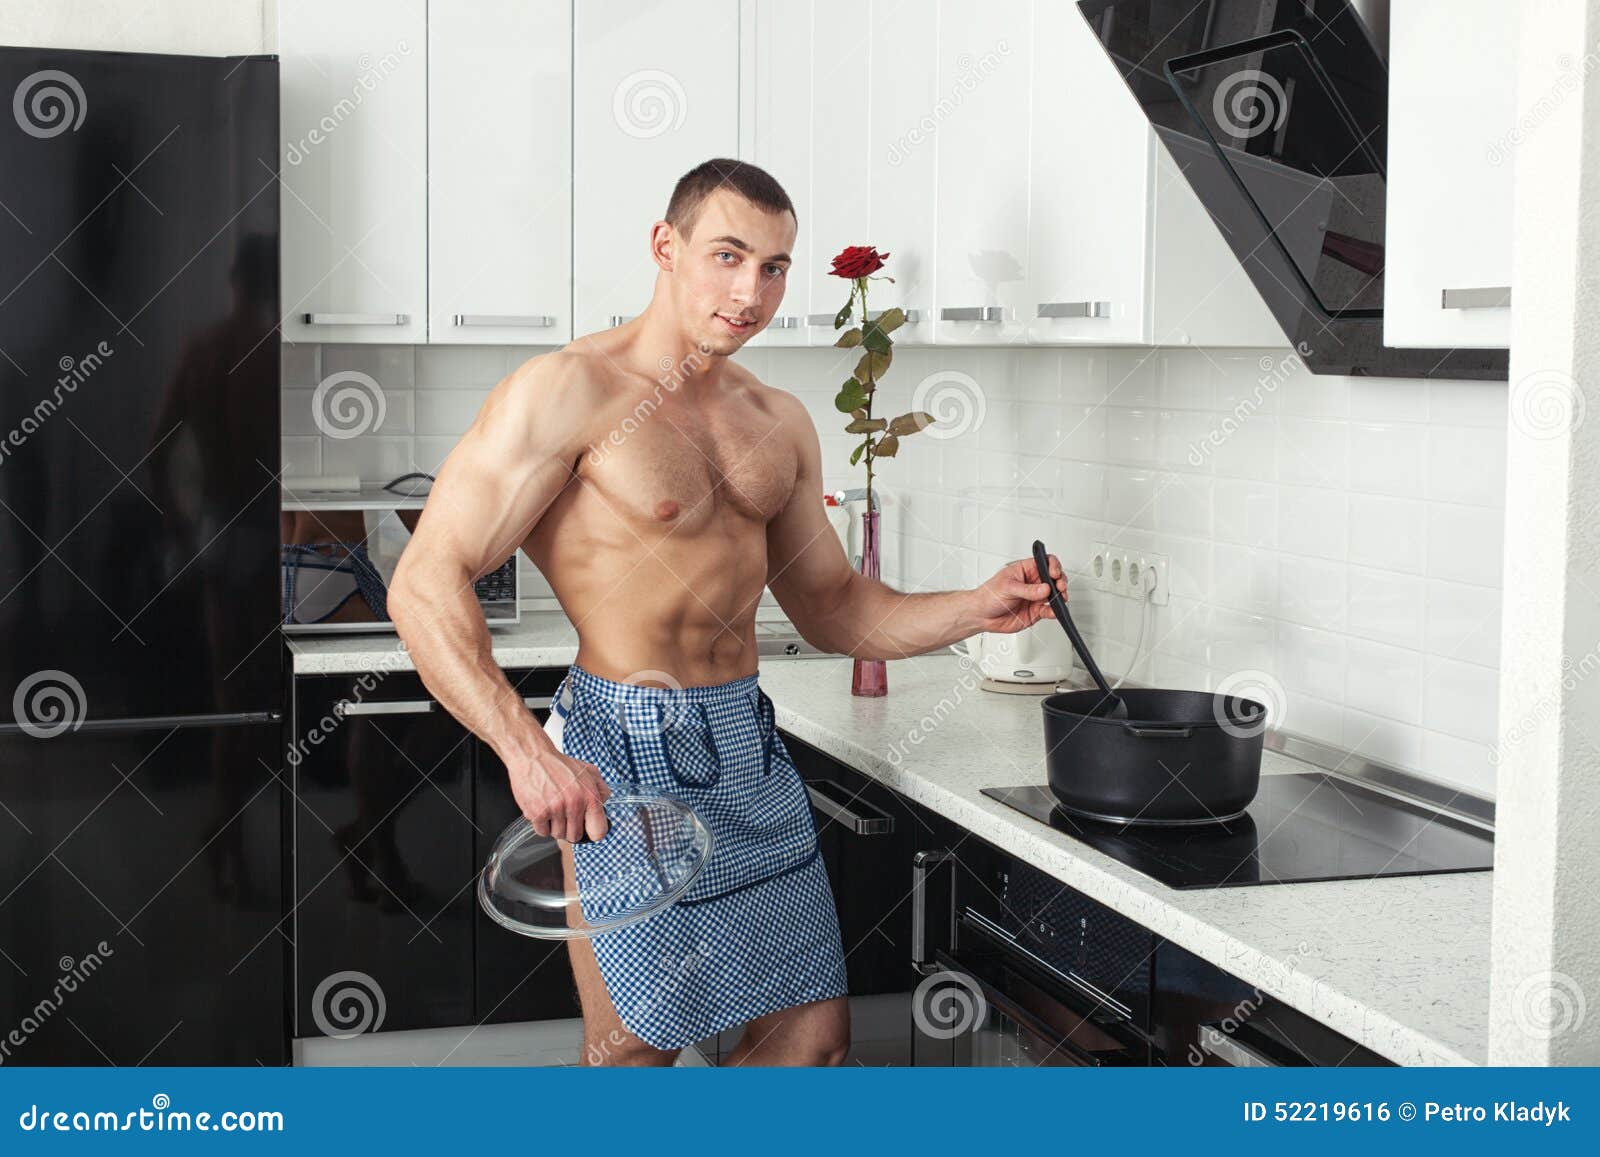 Two Handsome Chefs With Apron On Naked Muscular Body With 